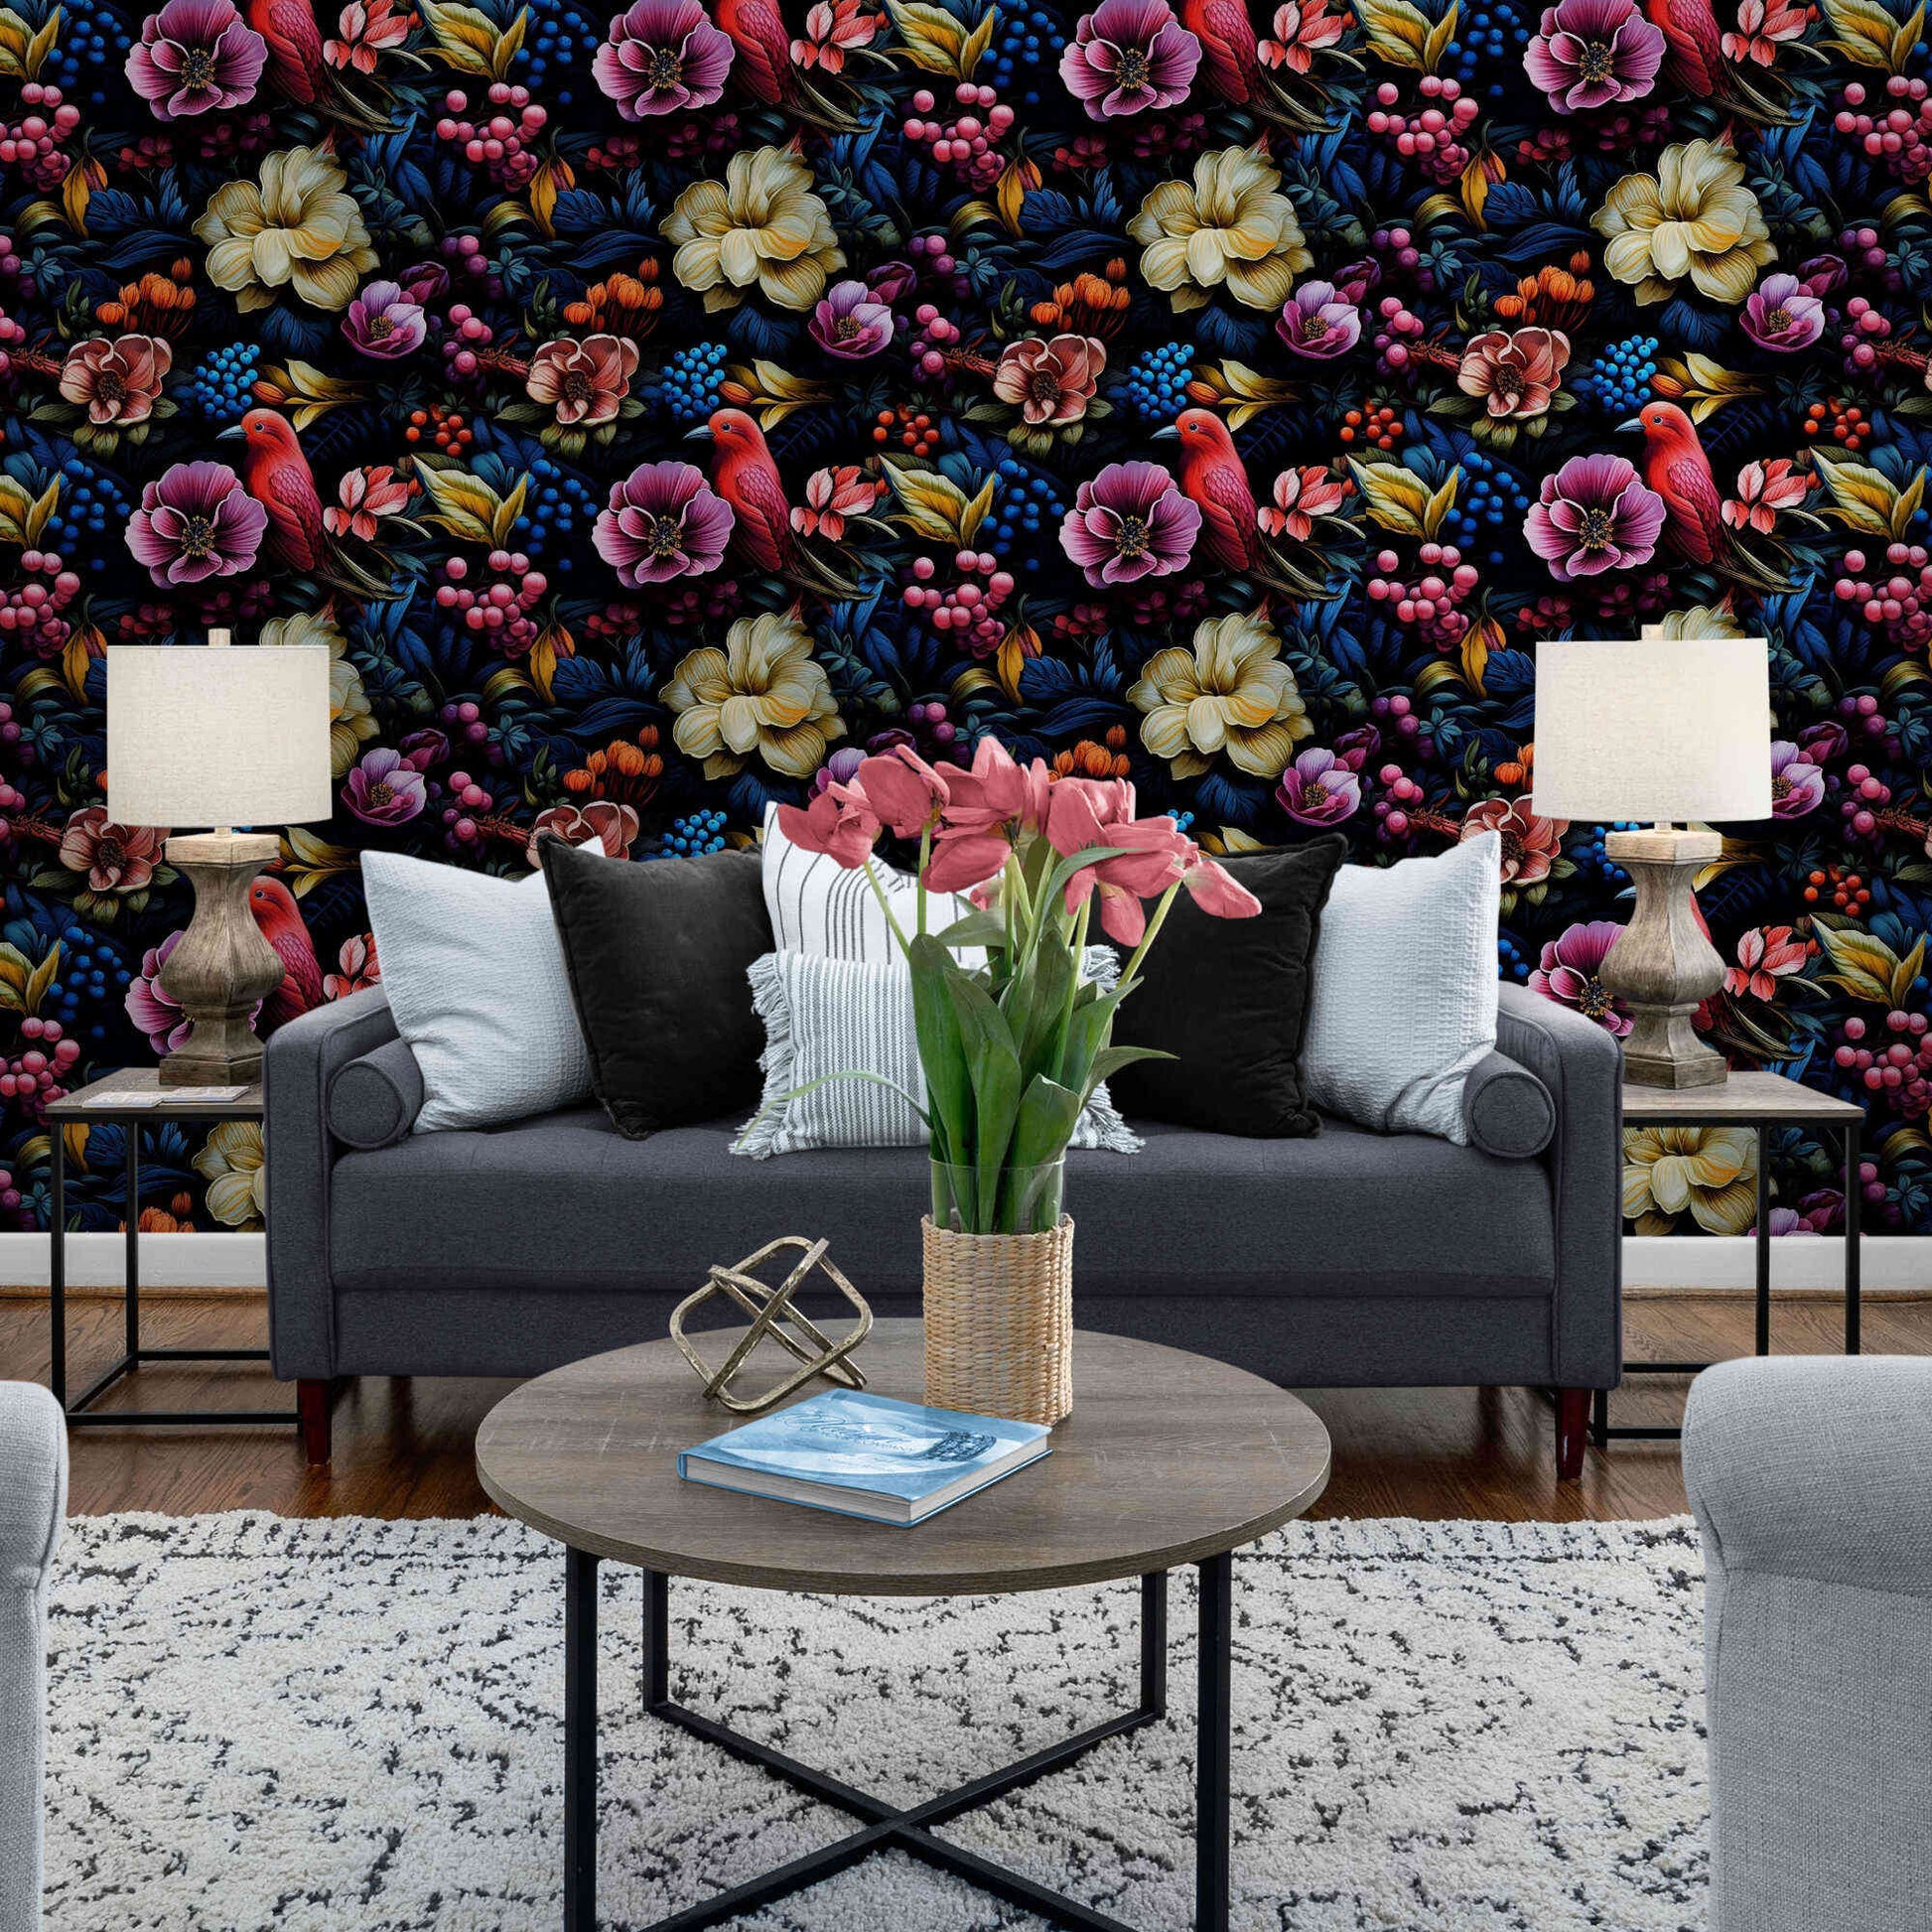 Lush botanical mural showcasing a vibrant array of greenery and flowers, transforming walls into a rich, garden oasis.